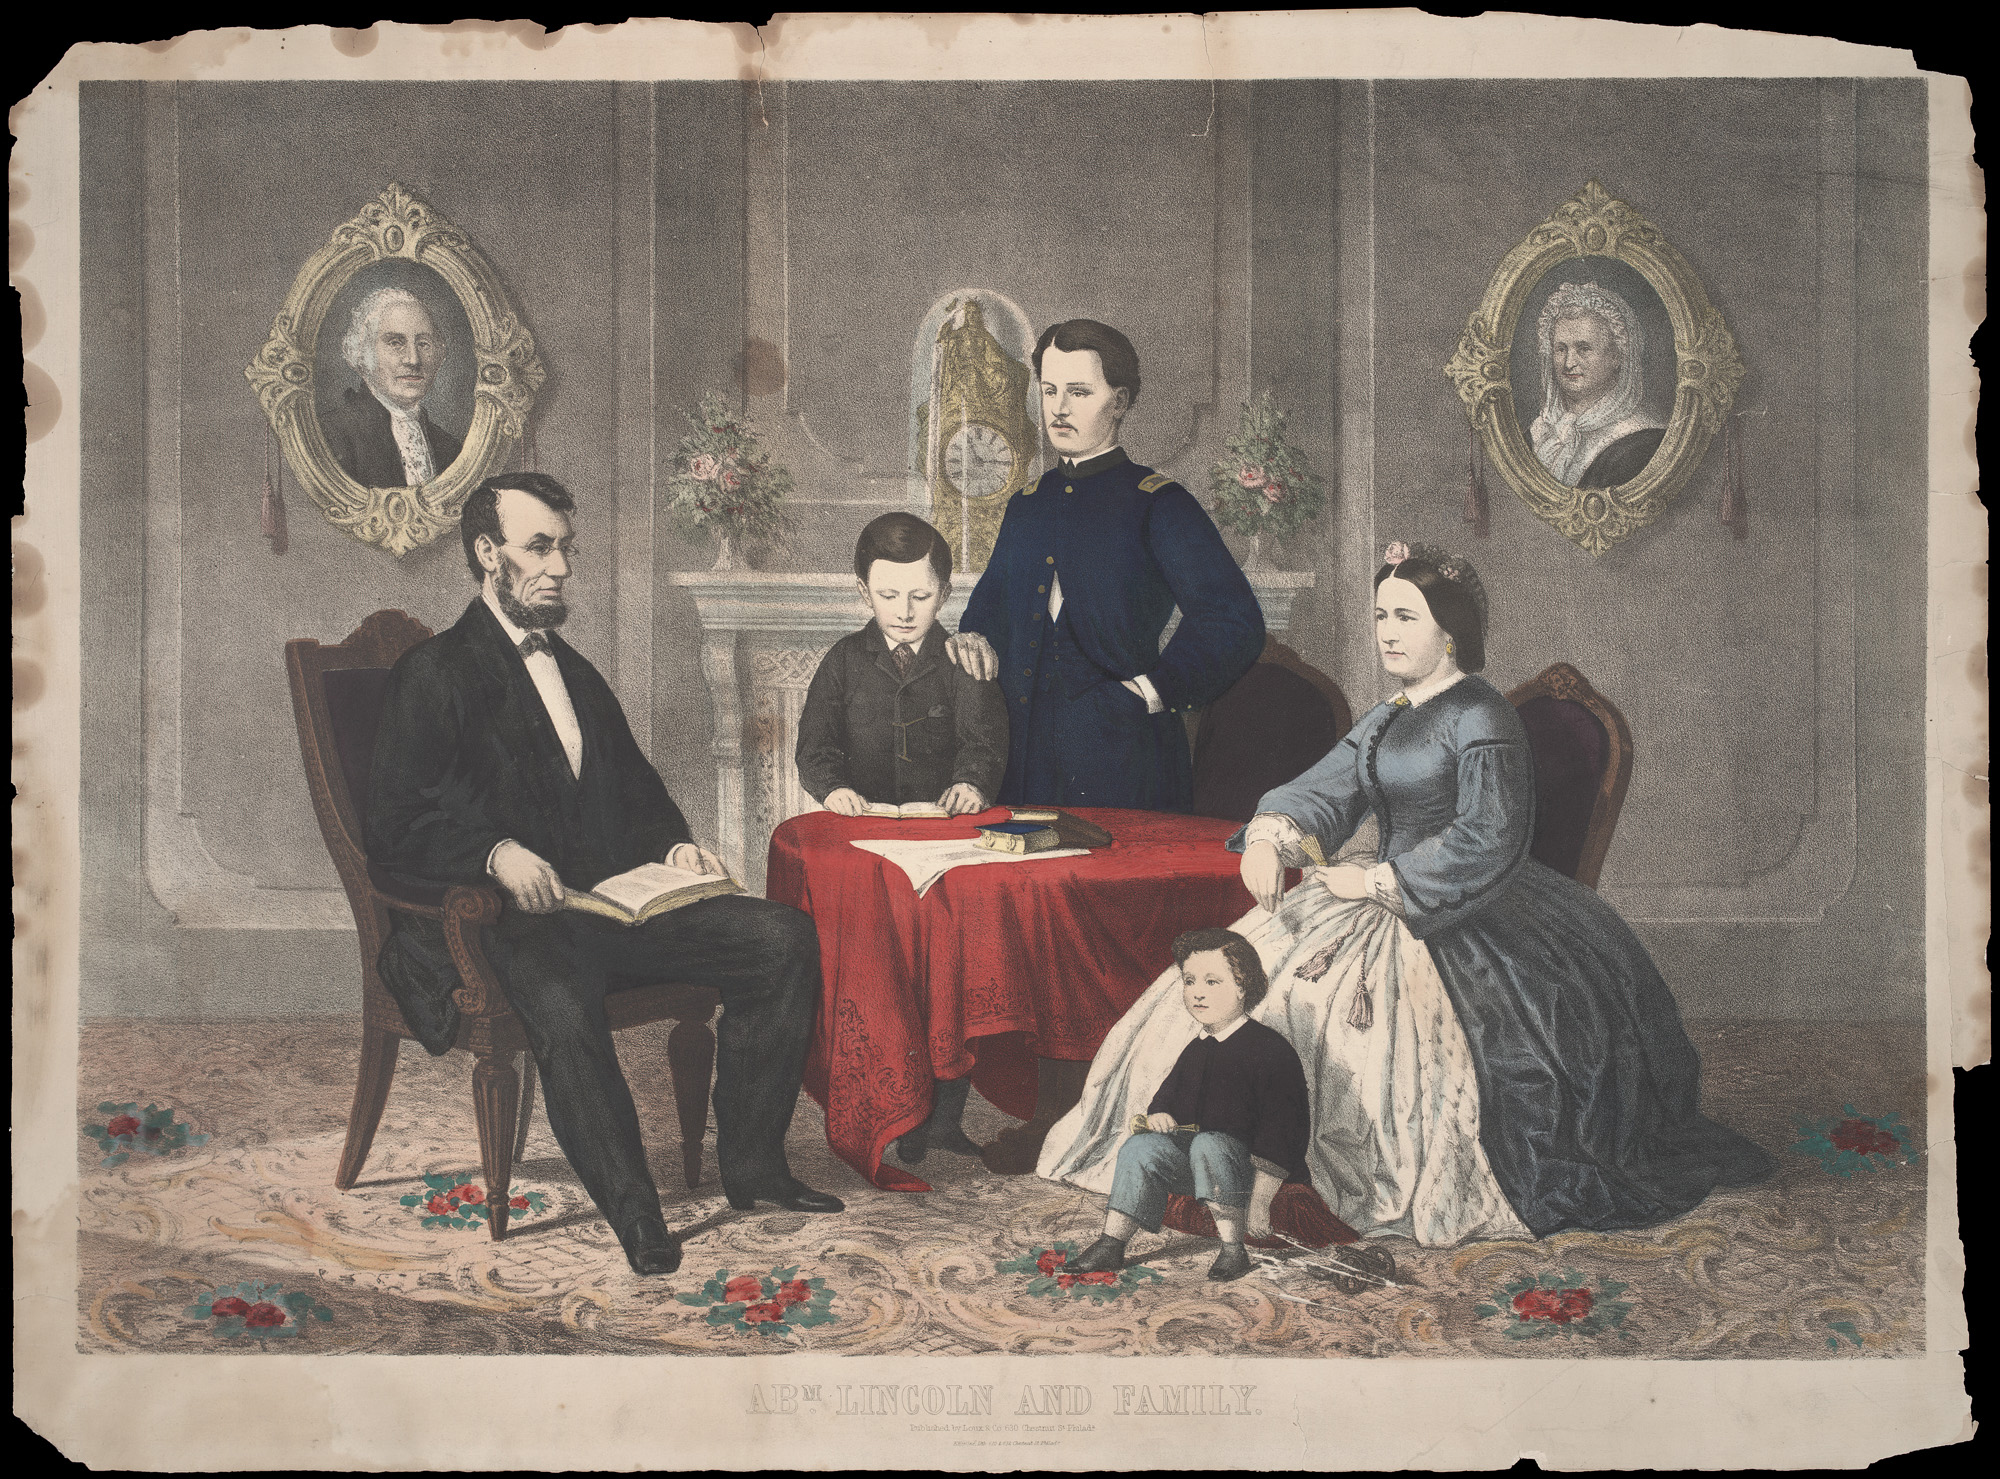 Edward Herline, <em>Abraham Lincoln and Family</em>, c. 1862, lithograph, 24 x 29 inches (Chicago History Museum)